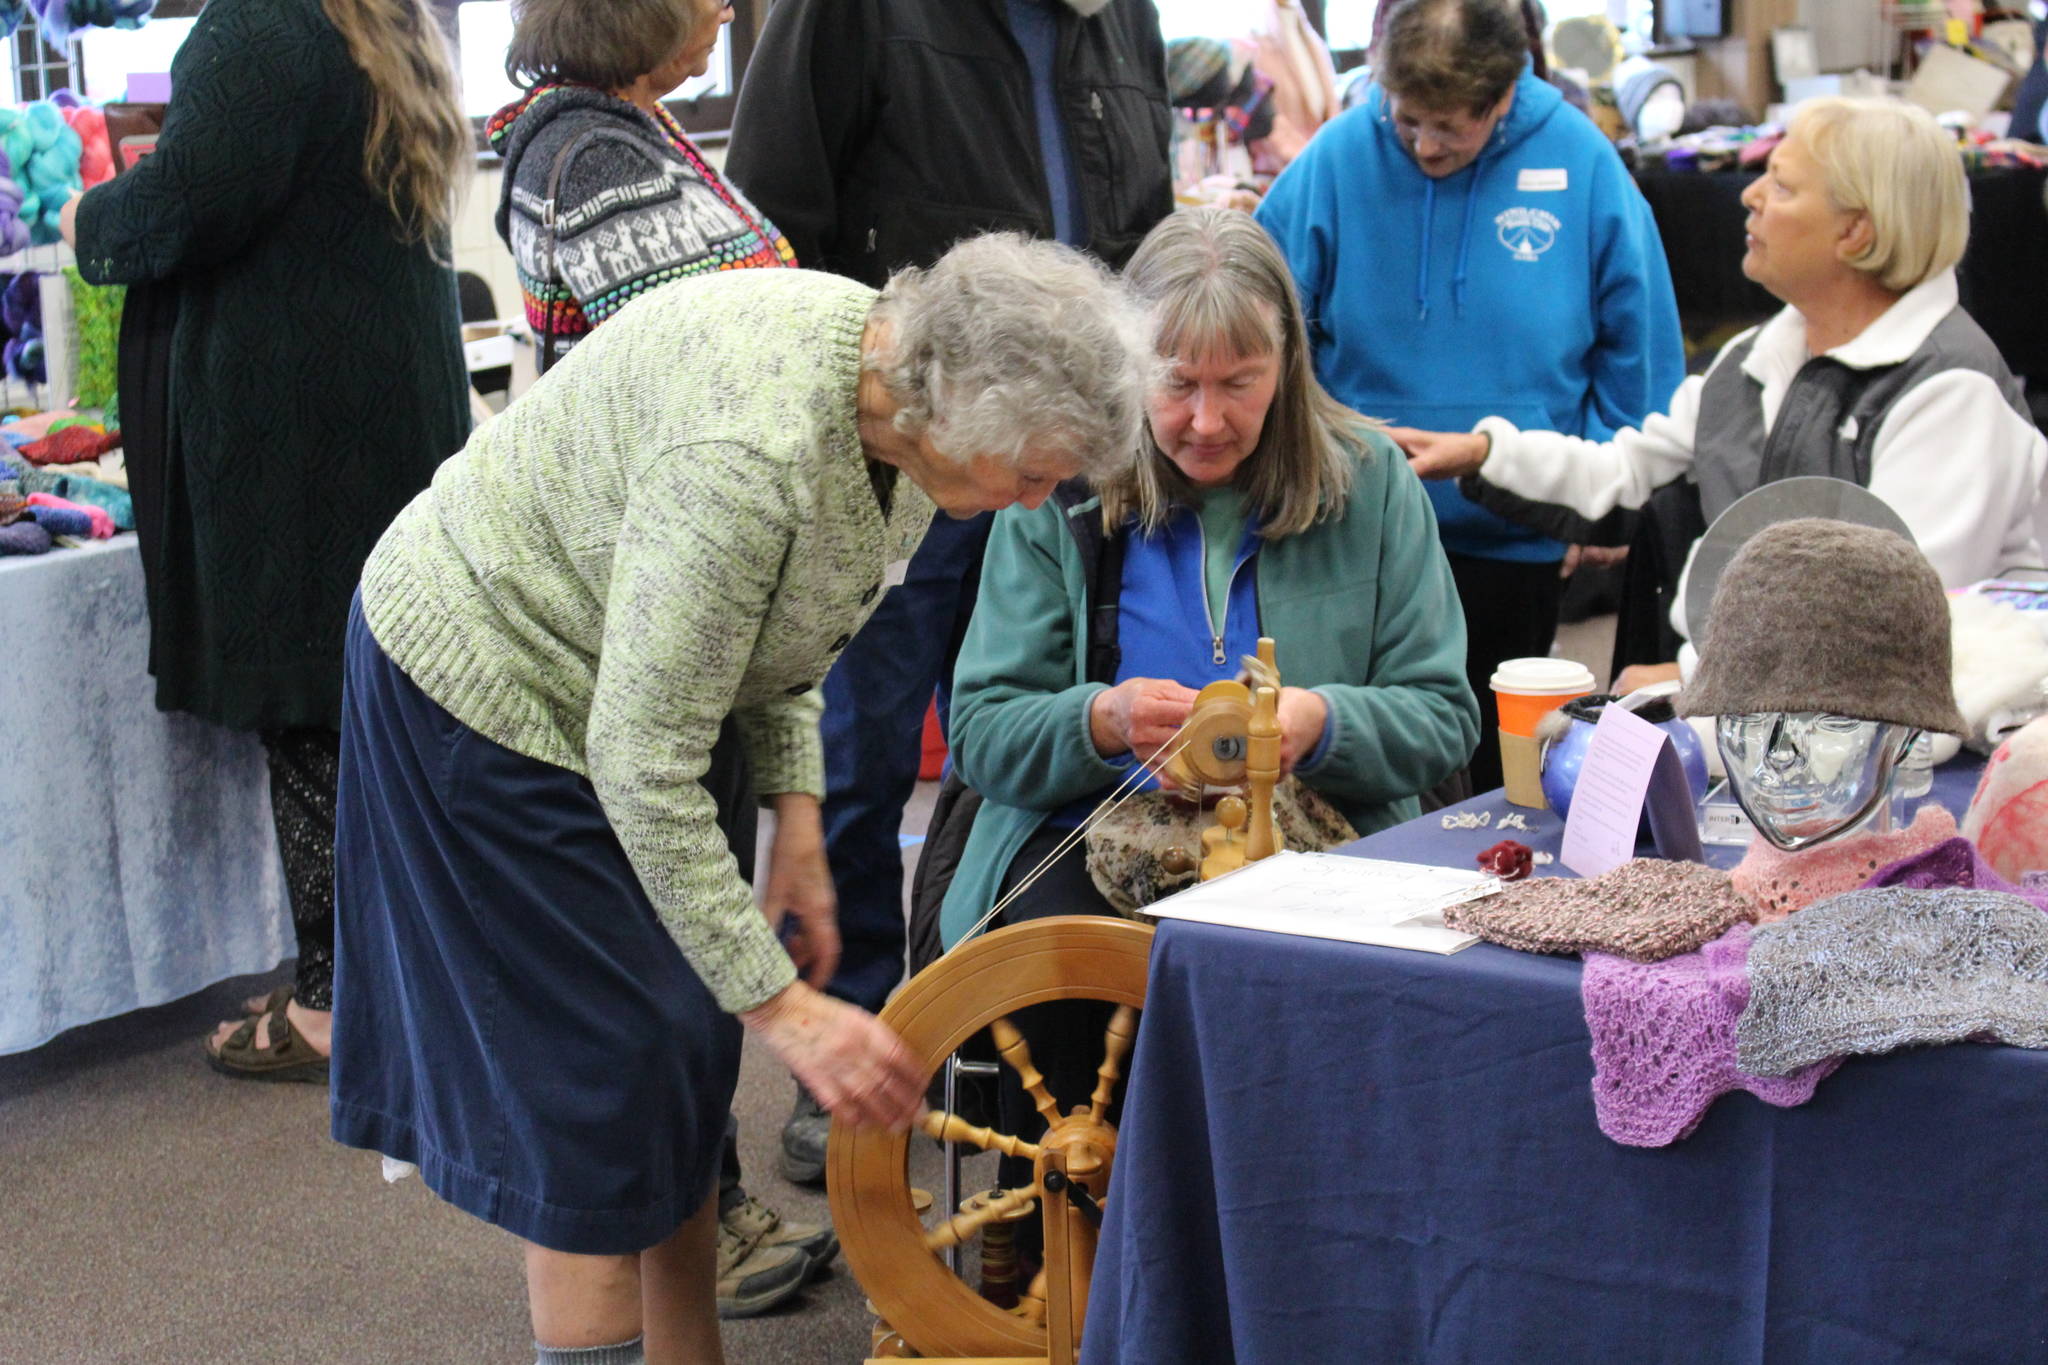 Alrene Haines, left instructs Donna Jones, right on how to use a spinning wheel during the Fireweed FiberFest at the Soldotna Regional Sports Complex on Sept. 28, 2019. (Photo by Brian Mazurek/Peninsula Clarion)